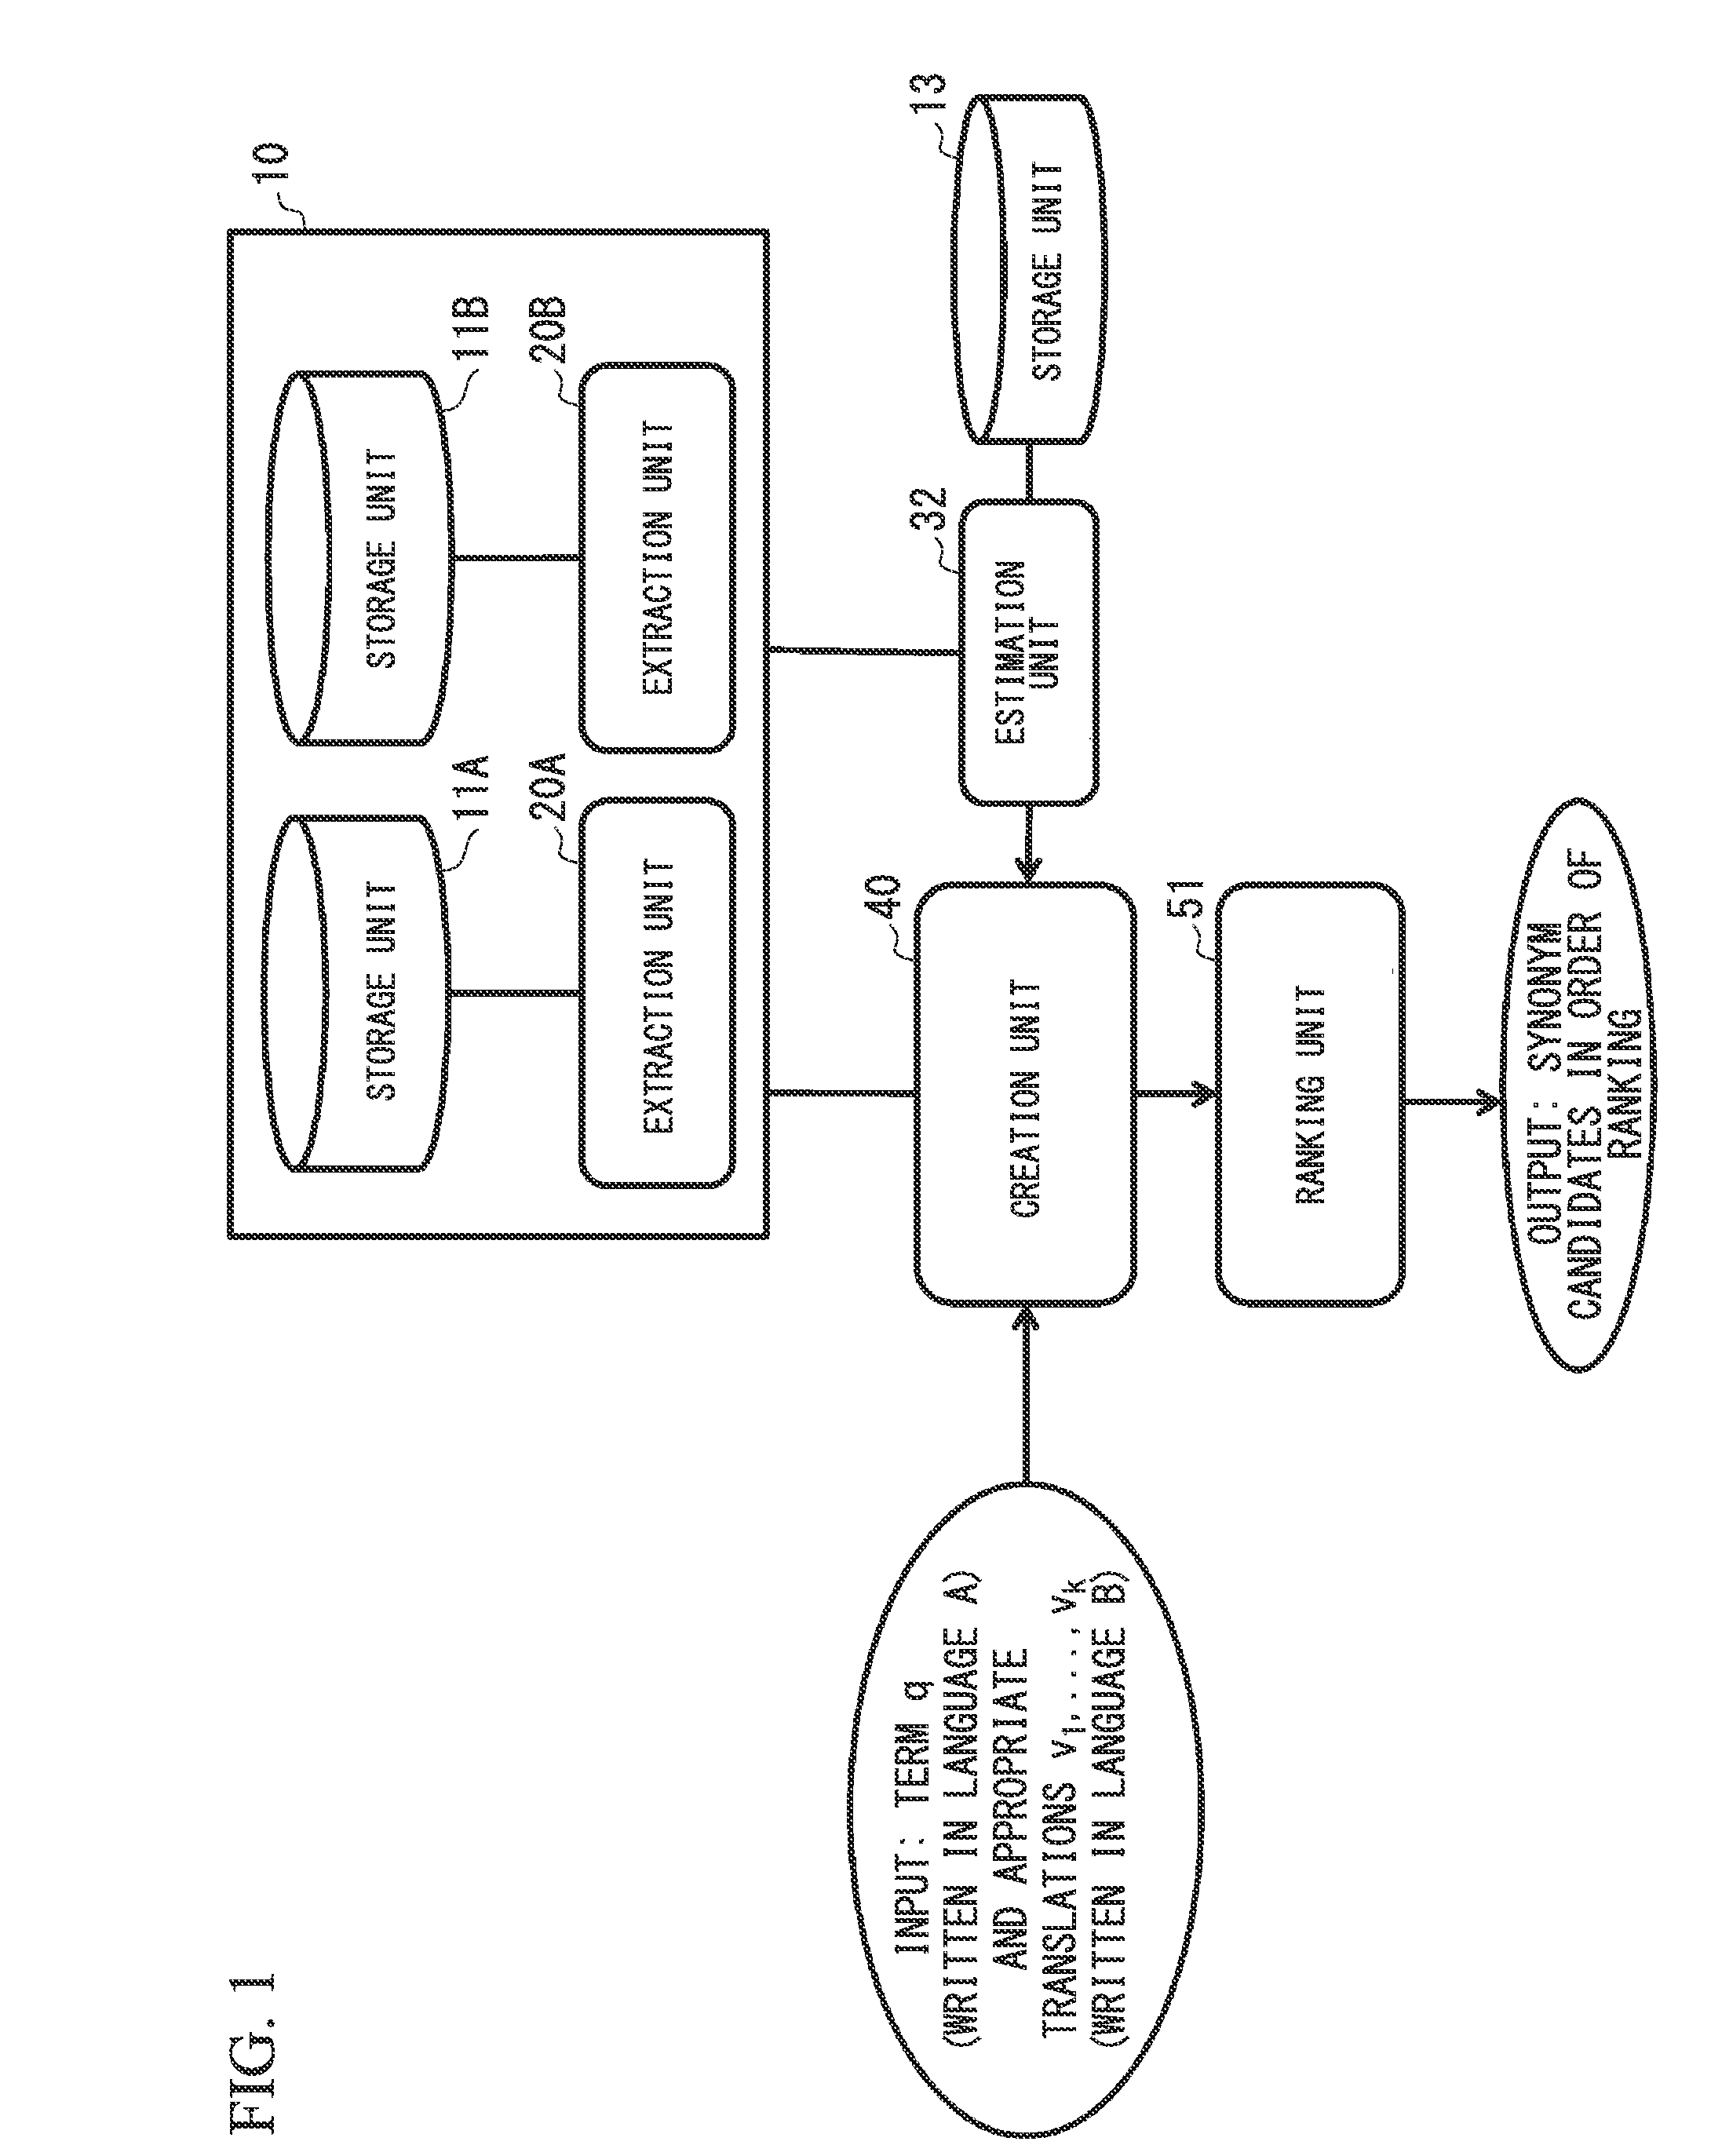 Term synonym acquisition method and term synonym acquisition apparatus